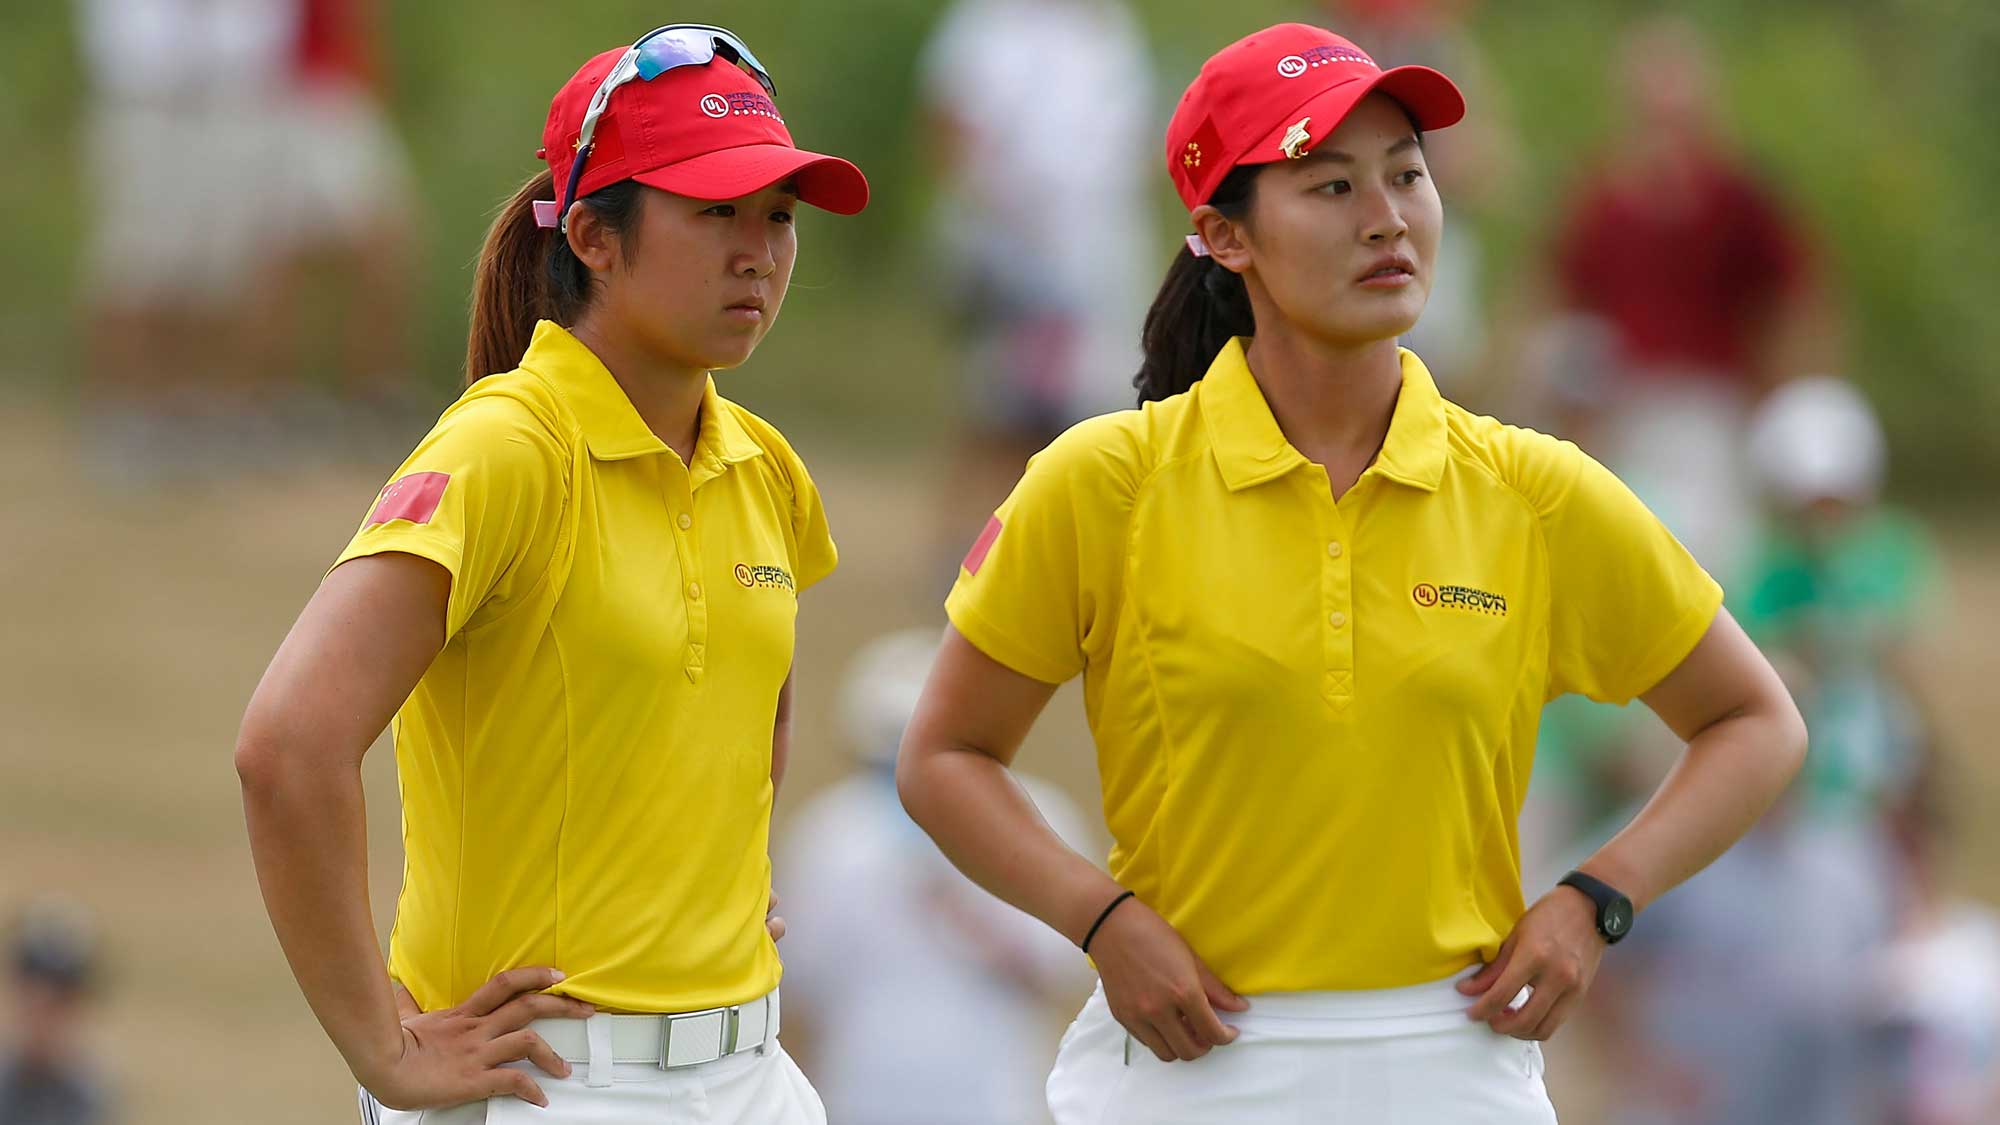 (L) Jing Yan and (R) Xi Yu Lin of China wait on the third green during the four-ball session of the 2016 UL International Crown